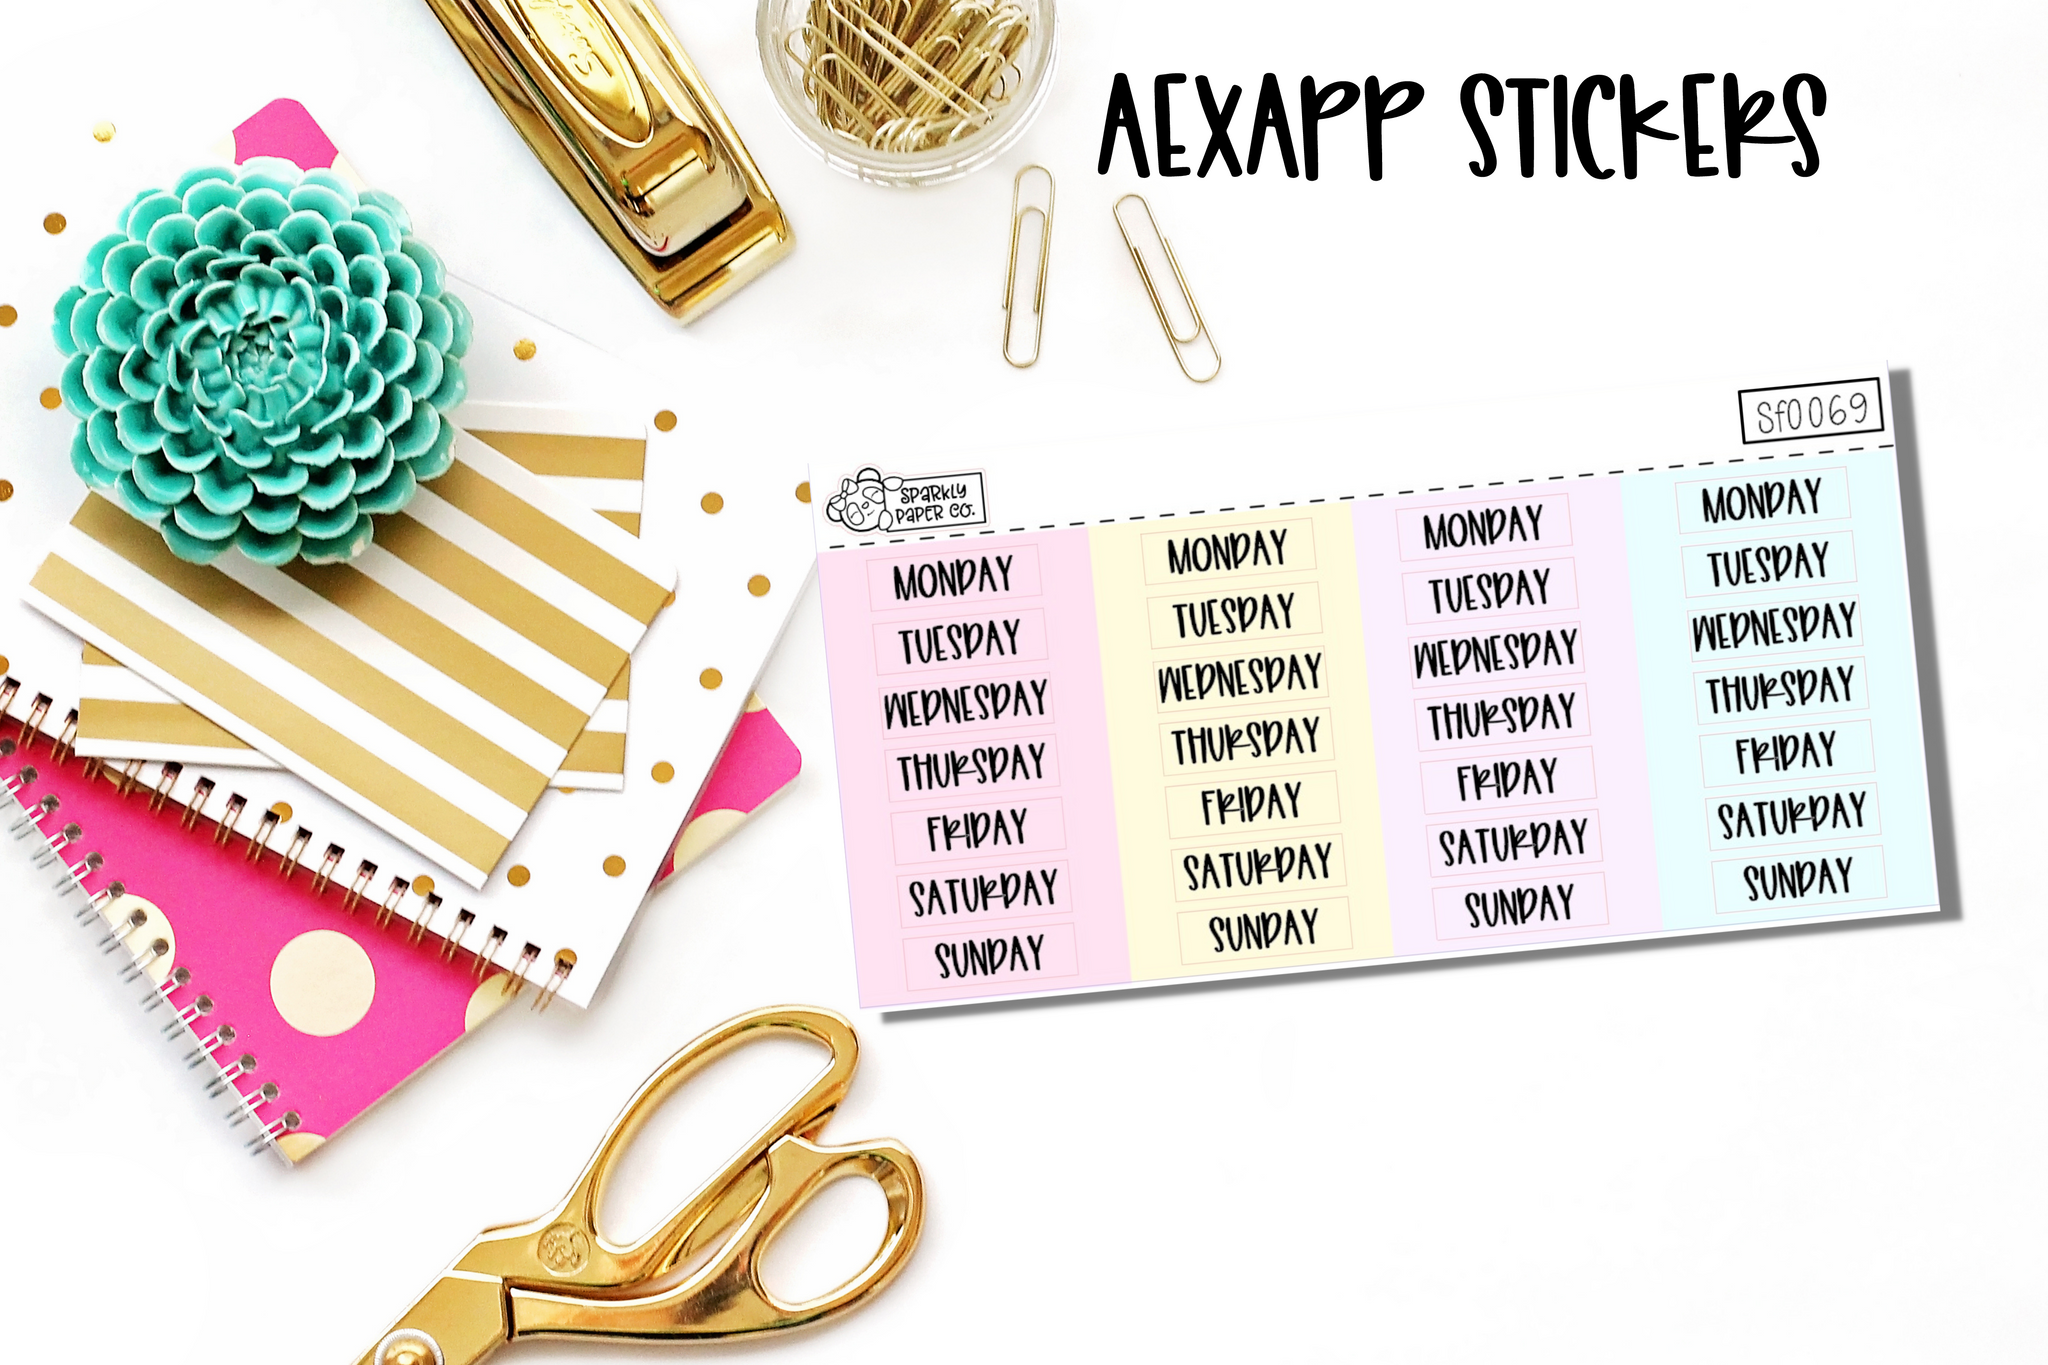 Pastel Monthly Days of the Week AExAPP Stickers (sf0069)